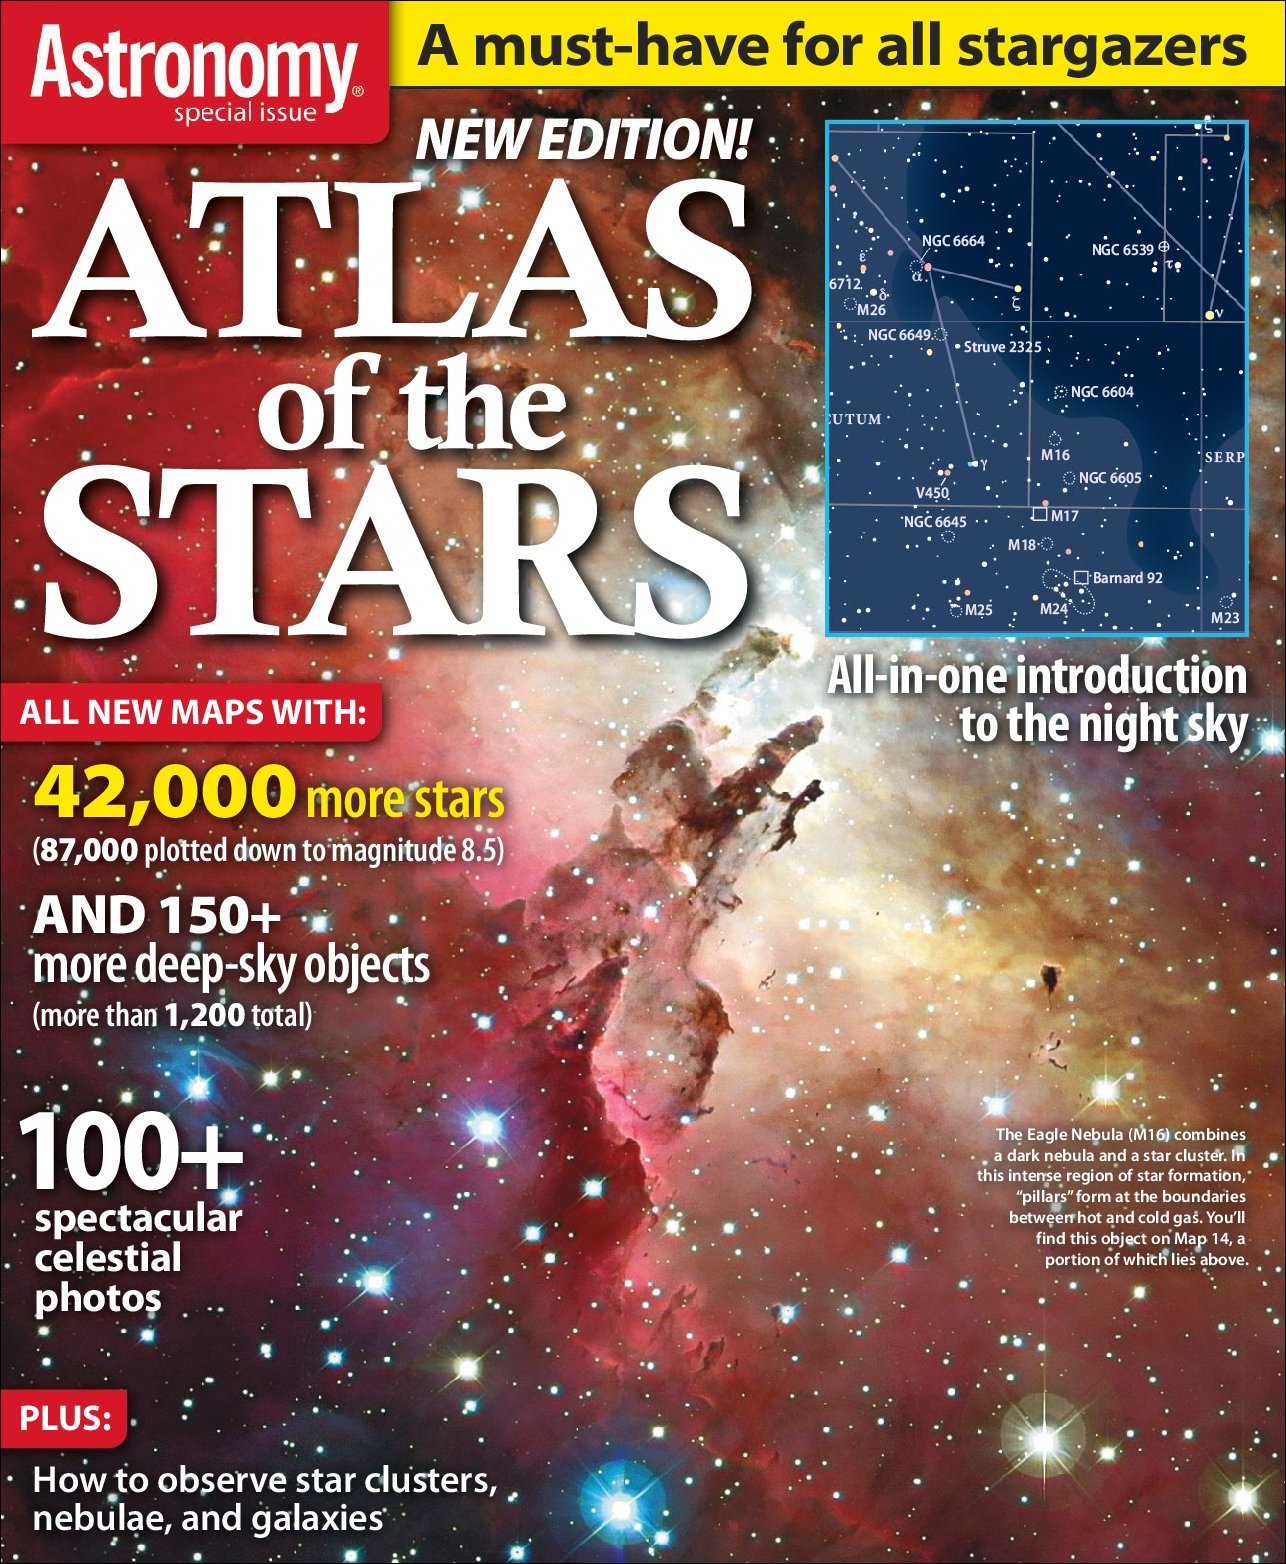 download the last version for ios Star Atlas